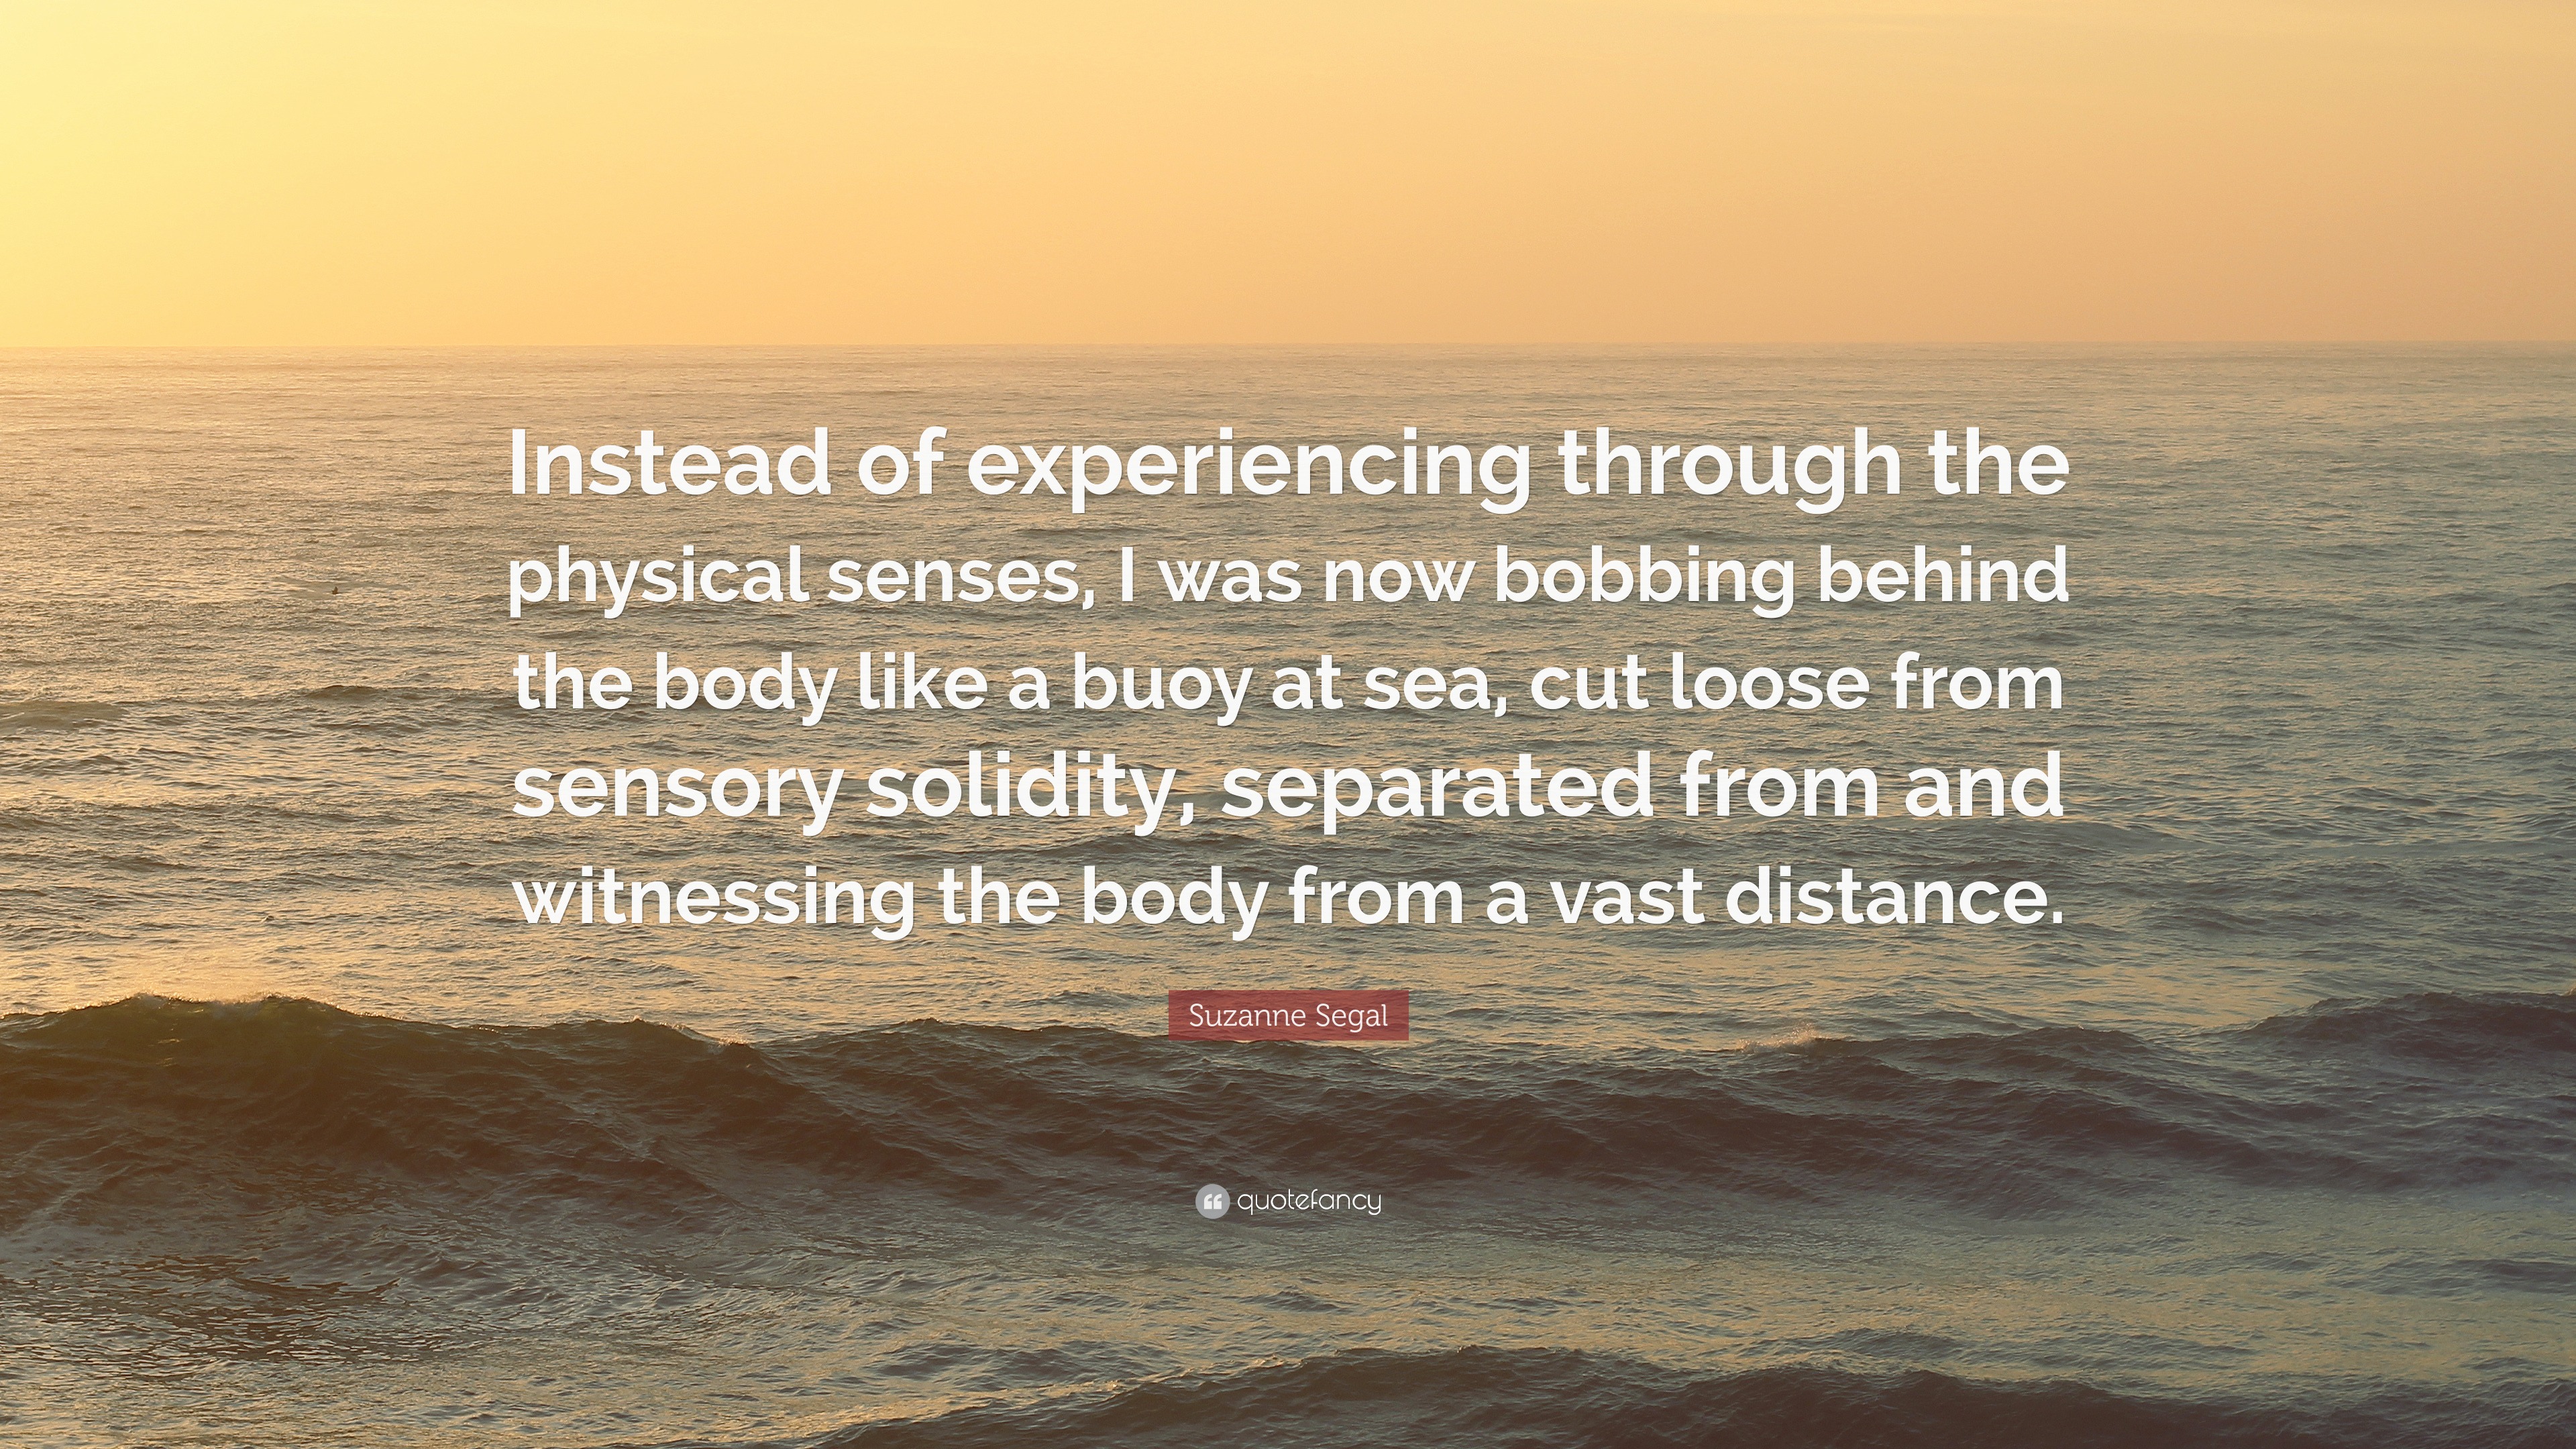 Suzanne Segal Quote: “Instead of experiencing through the physical ...